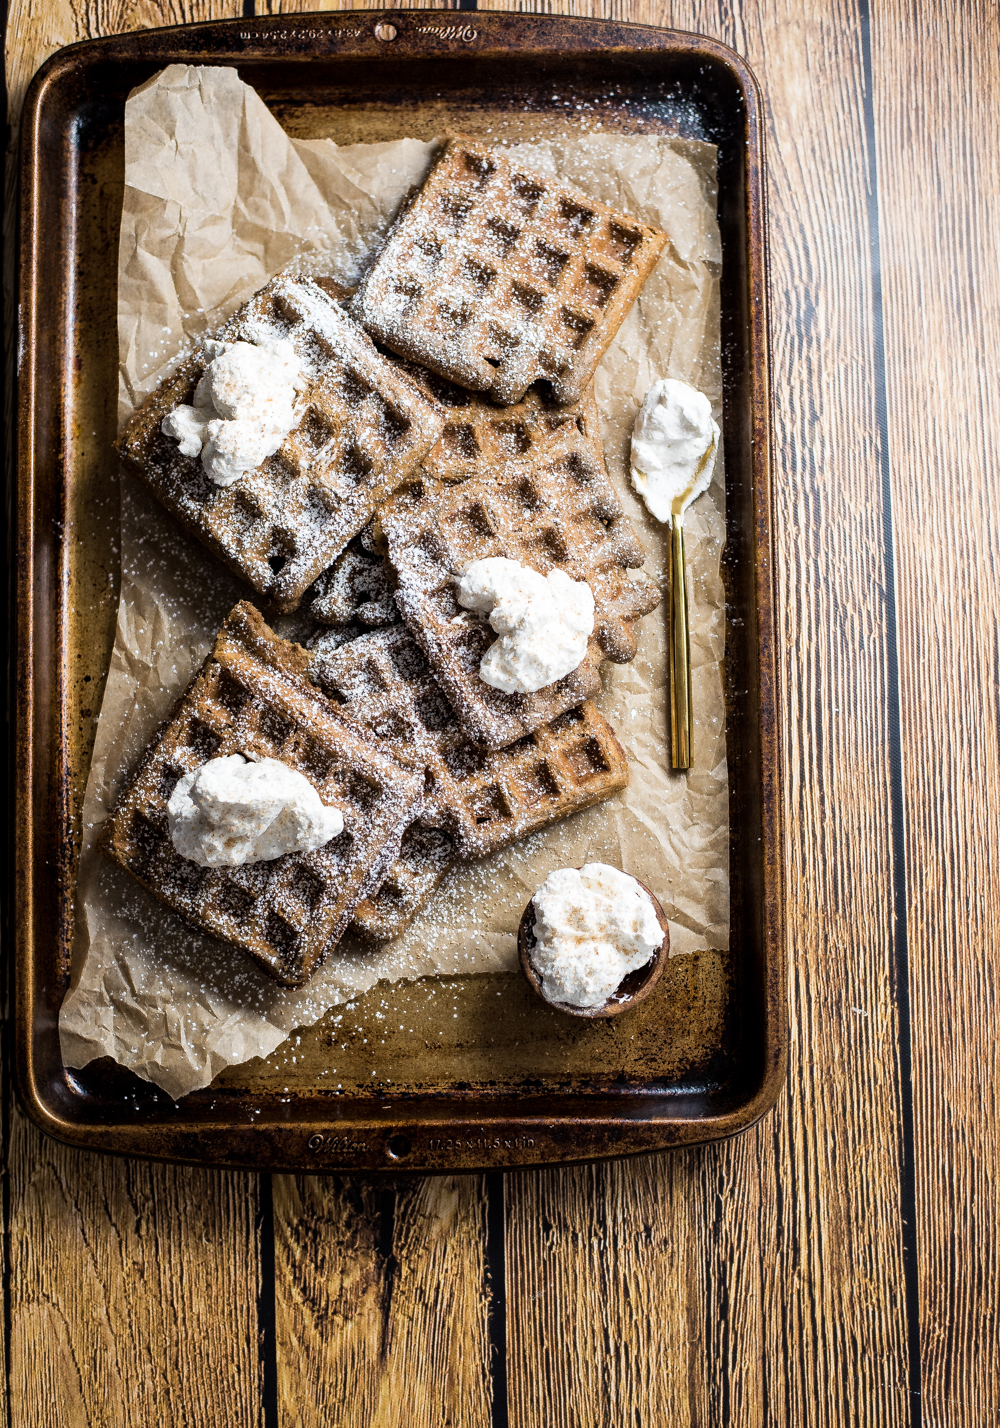 Cocoa chai buttermilk waffles with spiced whipped cream are the perfect weekend brunch recipe! They are comforting and delicious!